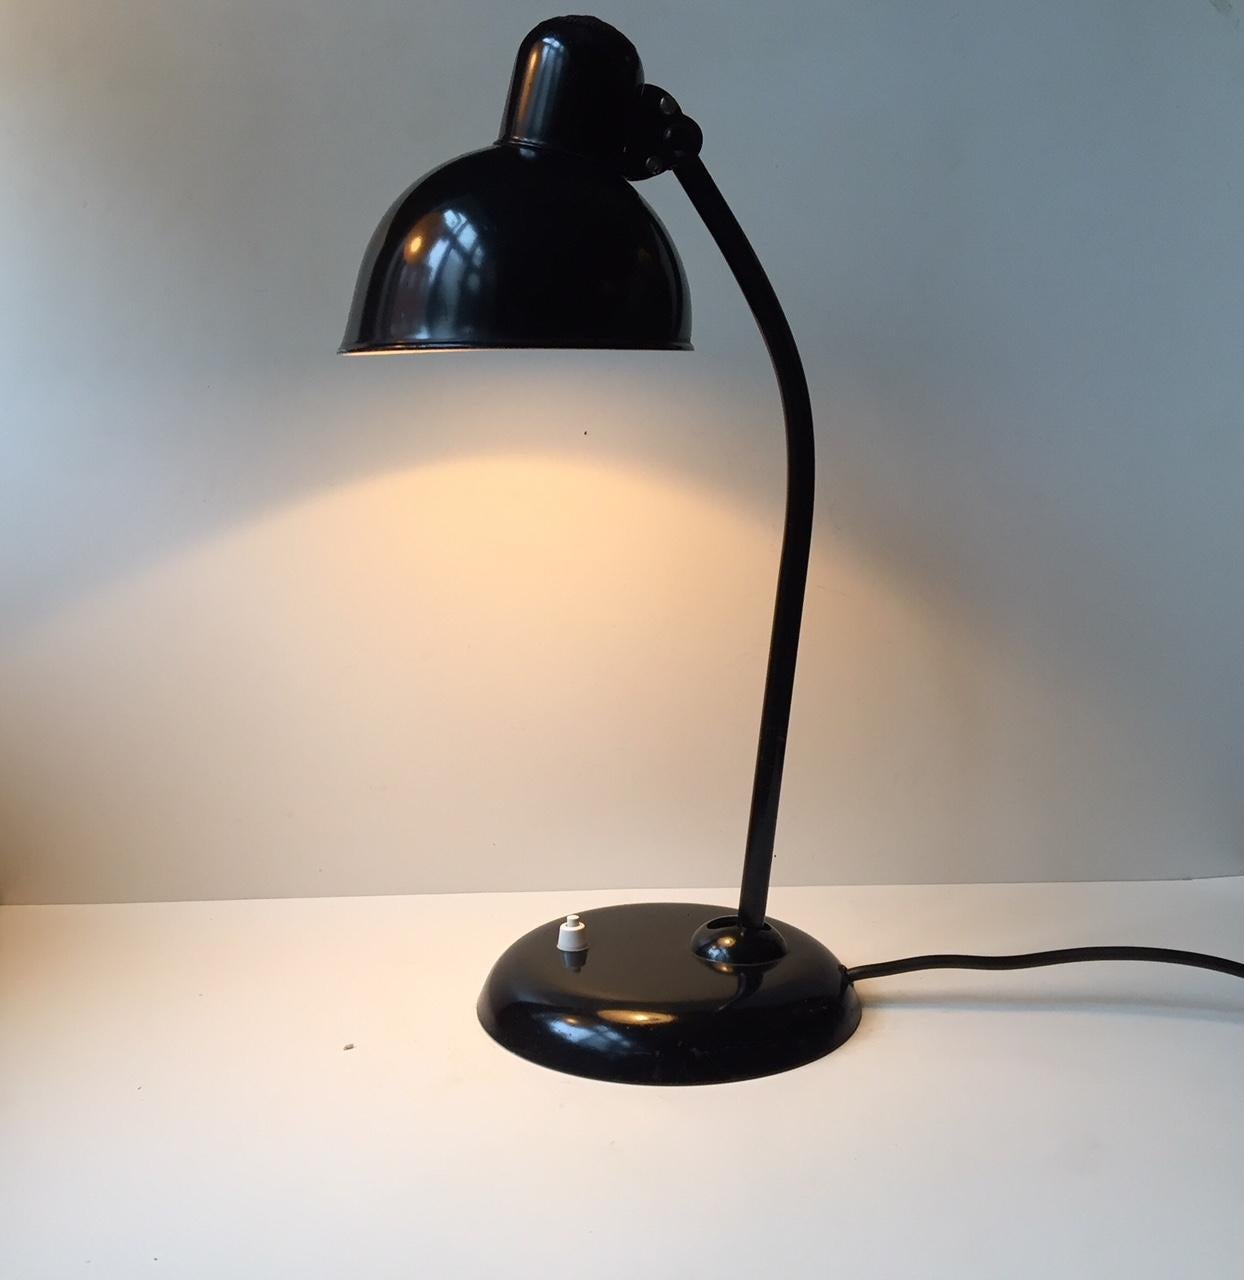 Kaiser Idell 6556 black desk lamp. This is the version with the smaller shade. Designed by iconic Bauhaus teacher Christian Dell. It features adjustable shade and vertically adjustable neck. It is unrestored and has its original lacquer and enamel.